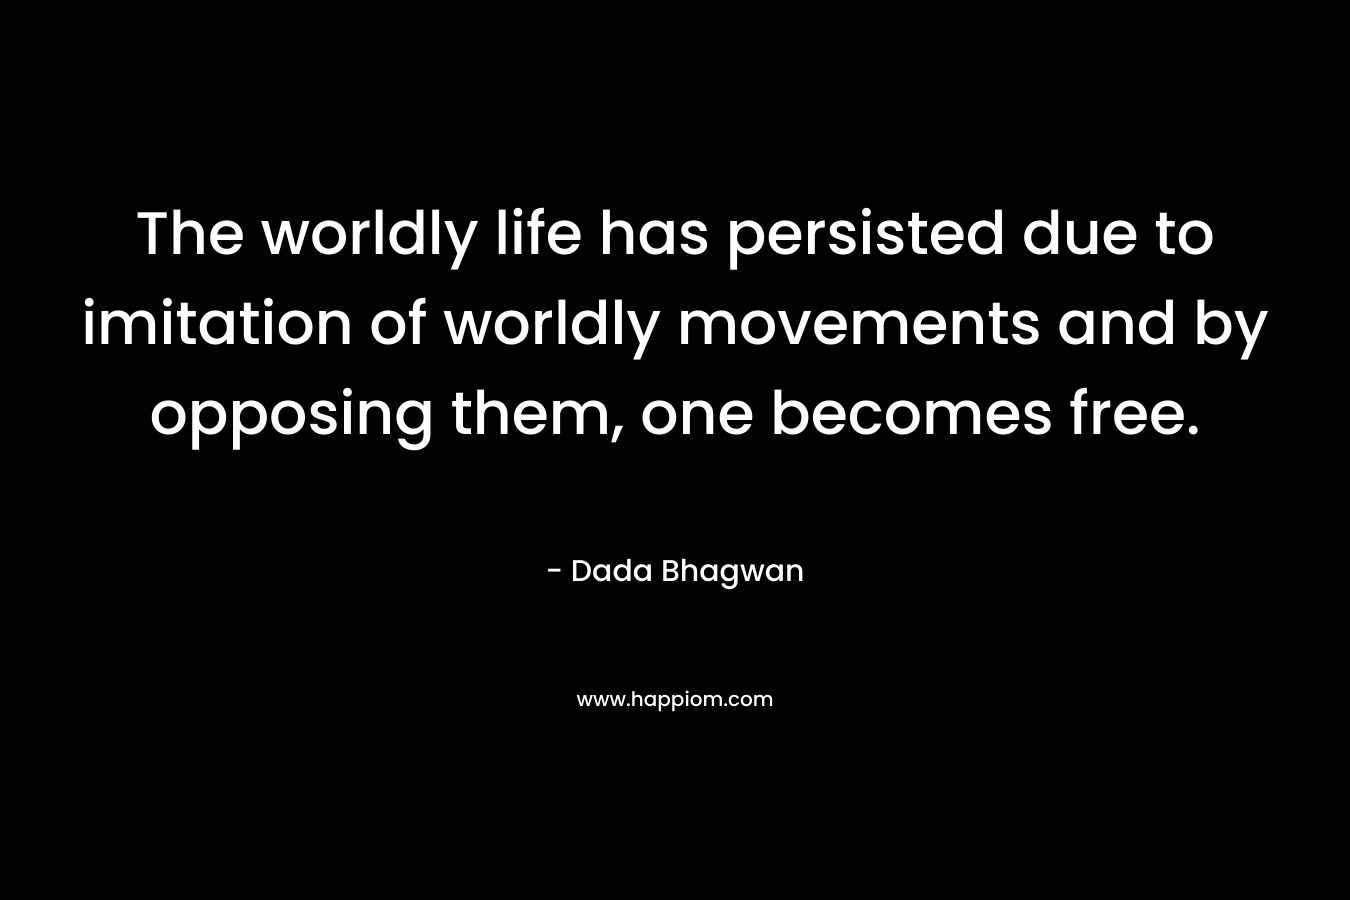 The worldly life has persisted due to imitation of worldly movements and by opposing them, one becomes free.